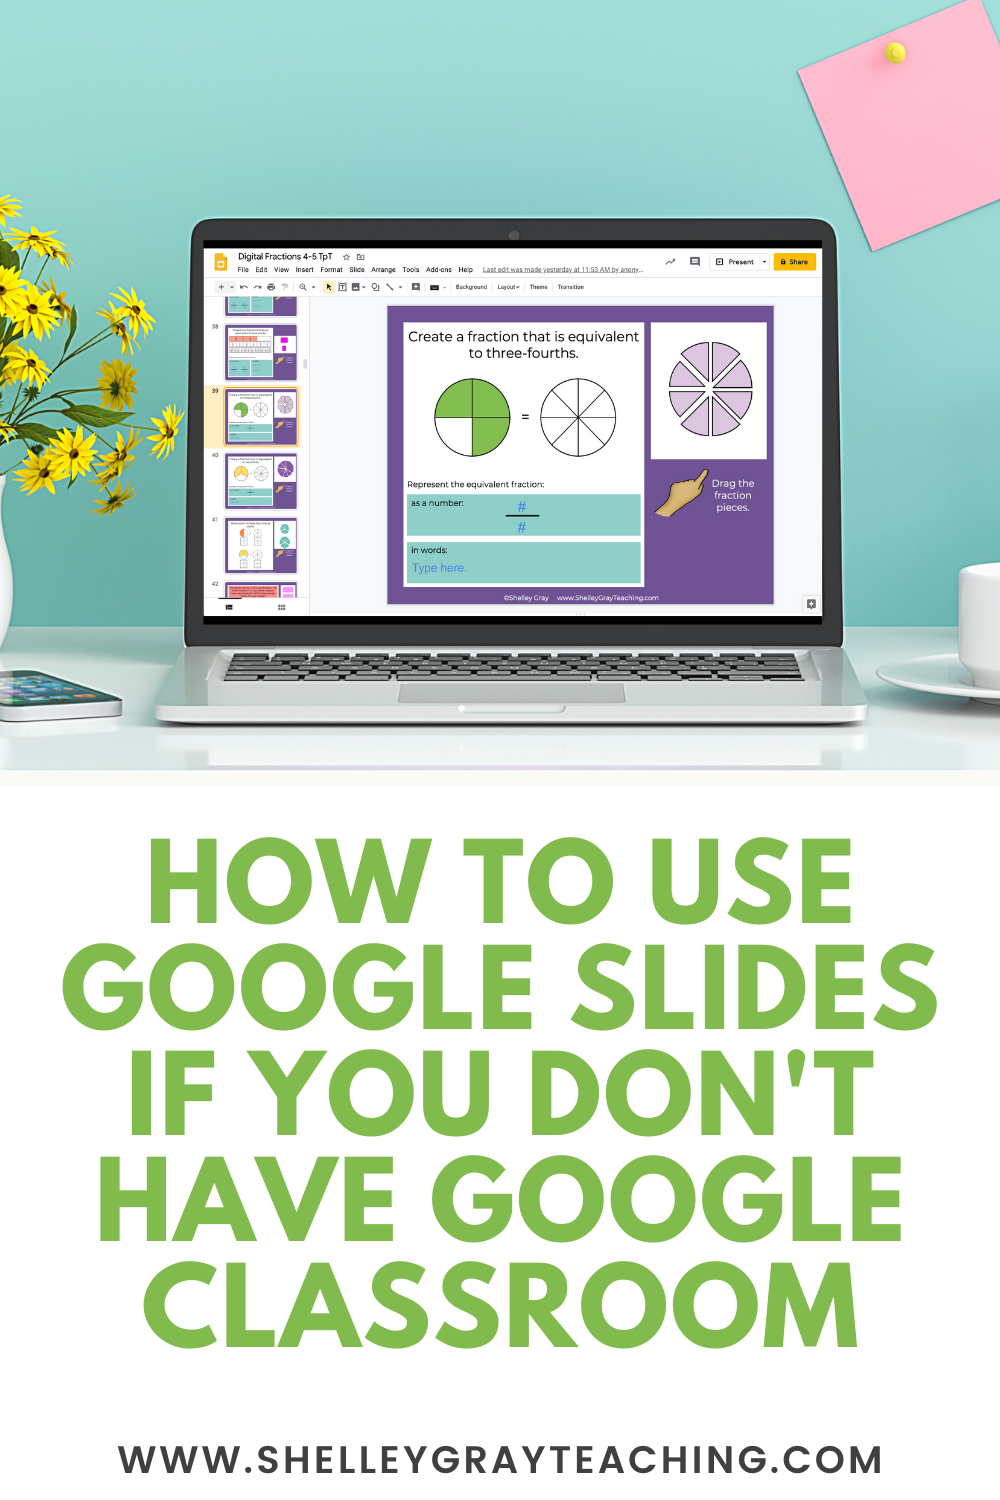 How to Use Google Slides if You Don't Have Google Classroom